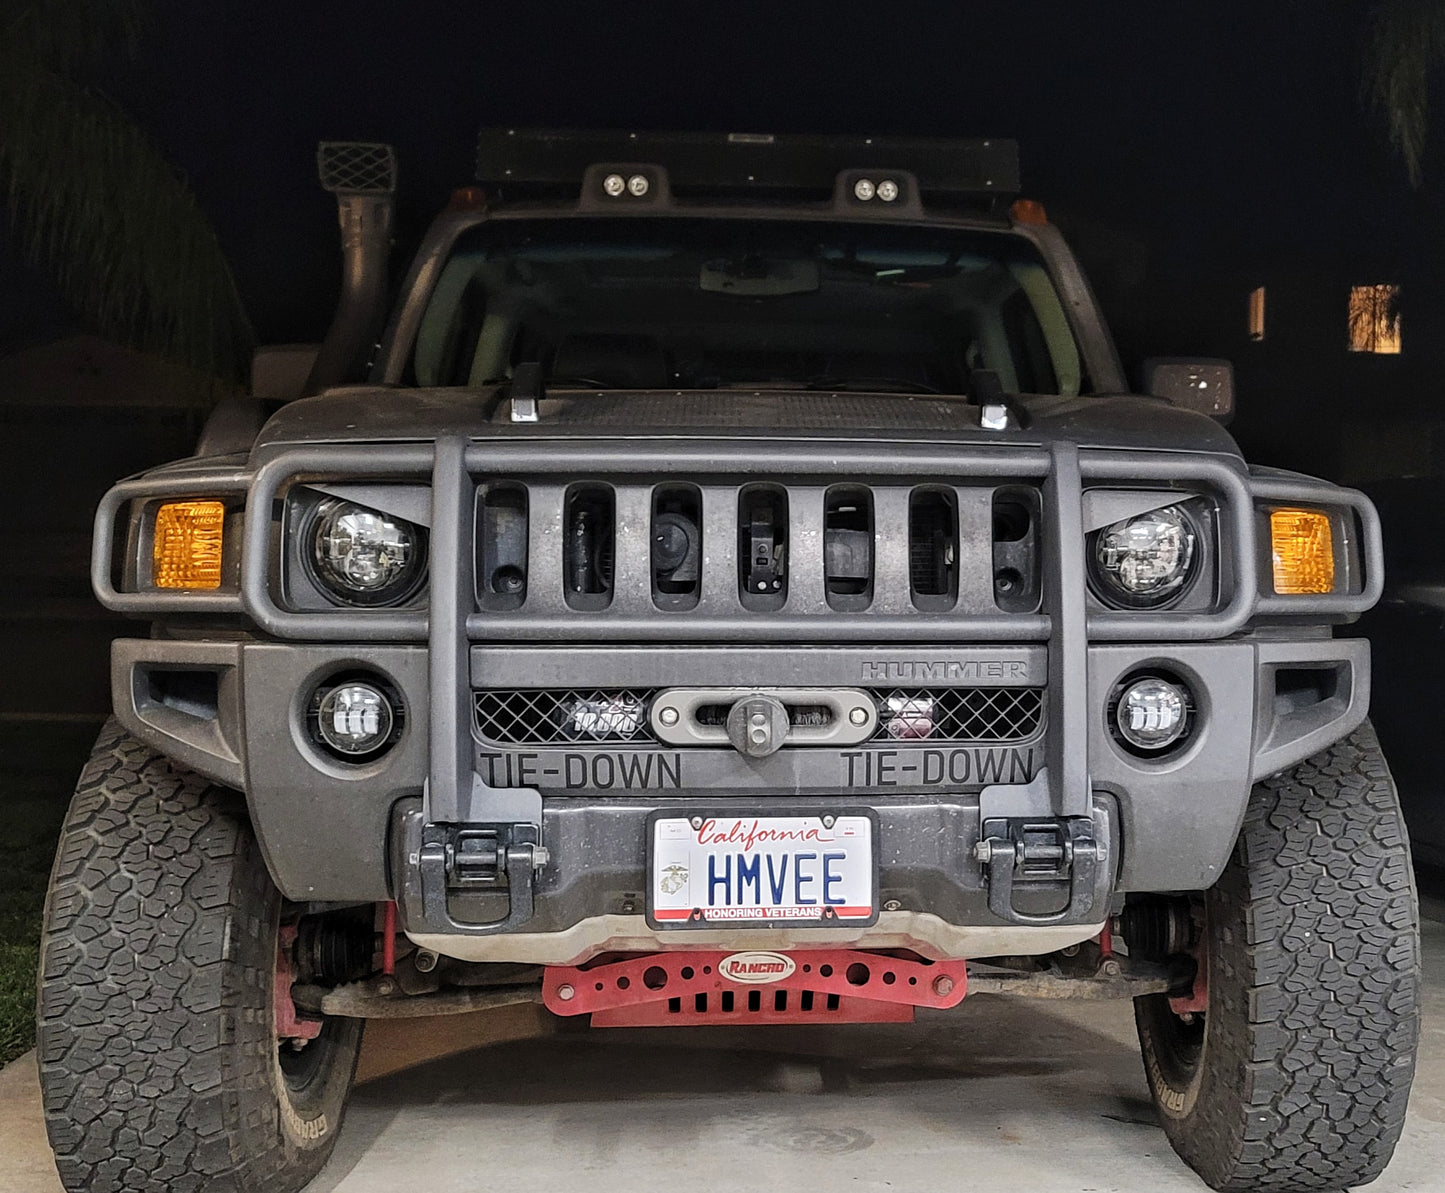 Hummer H3 Angry Eyes Grill Inserts